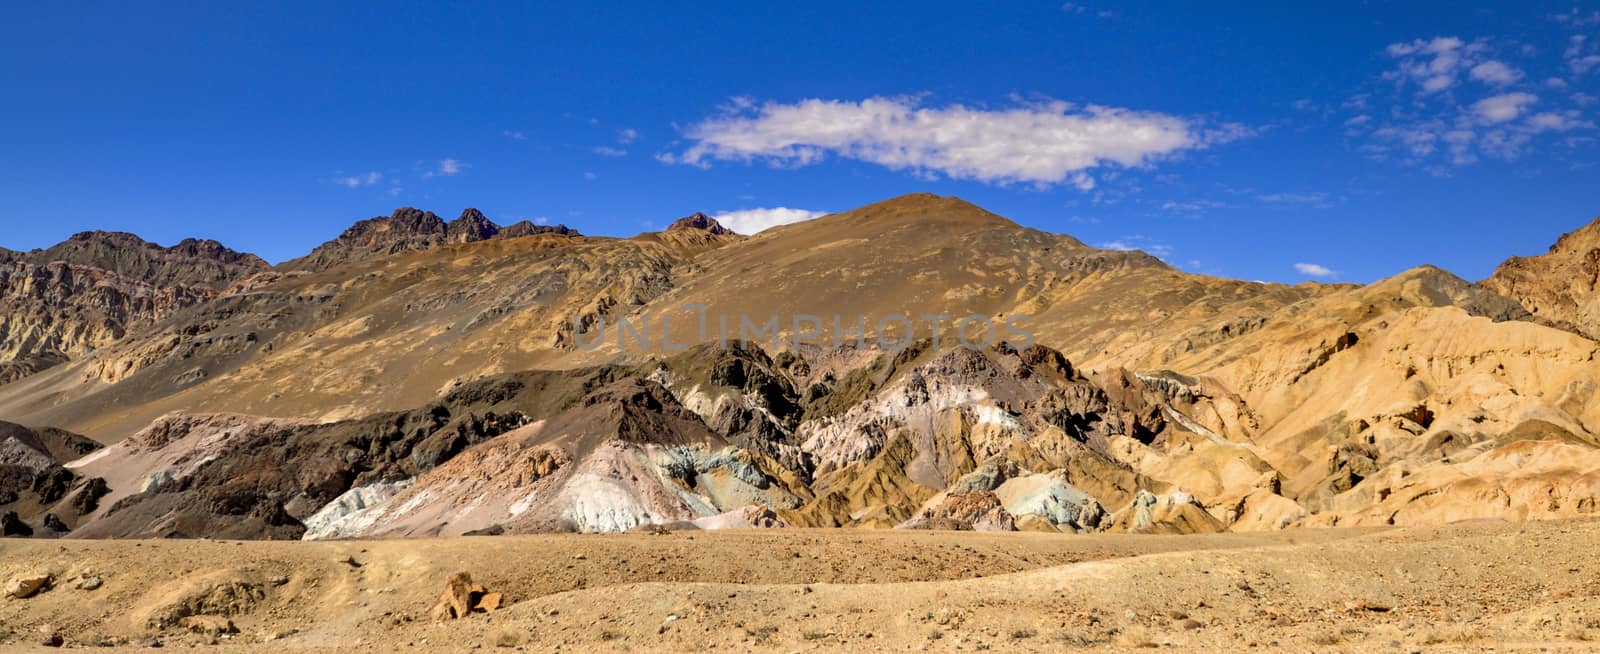 The Colorfull mountains around Death Valley